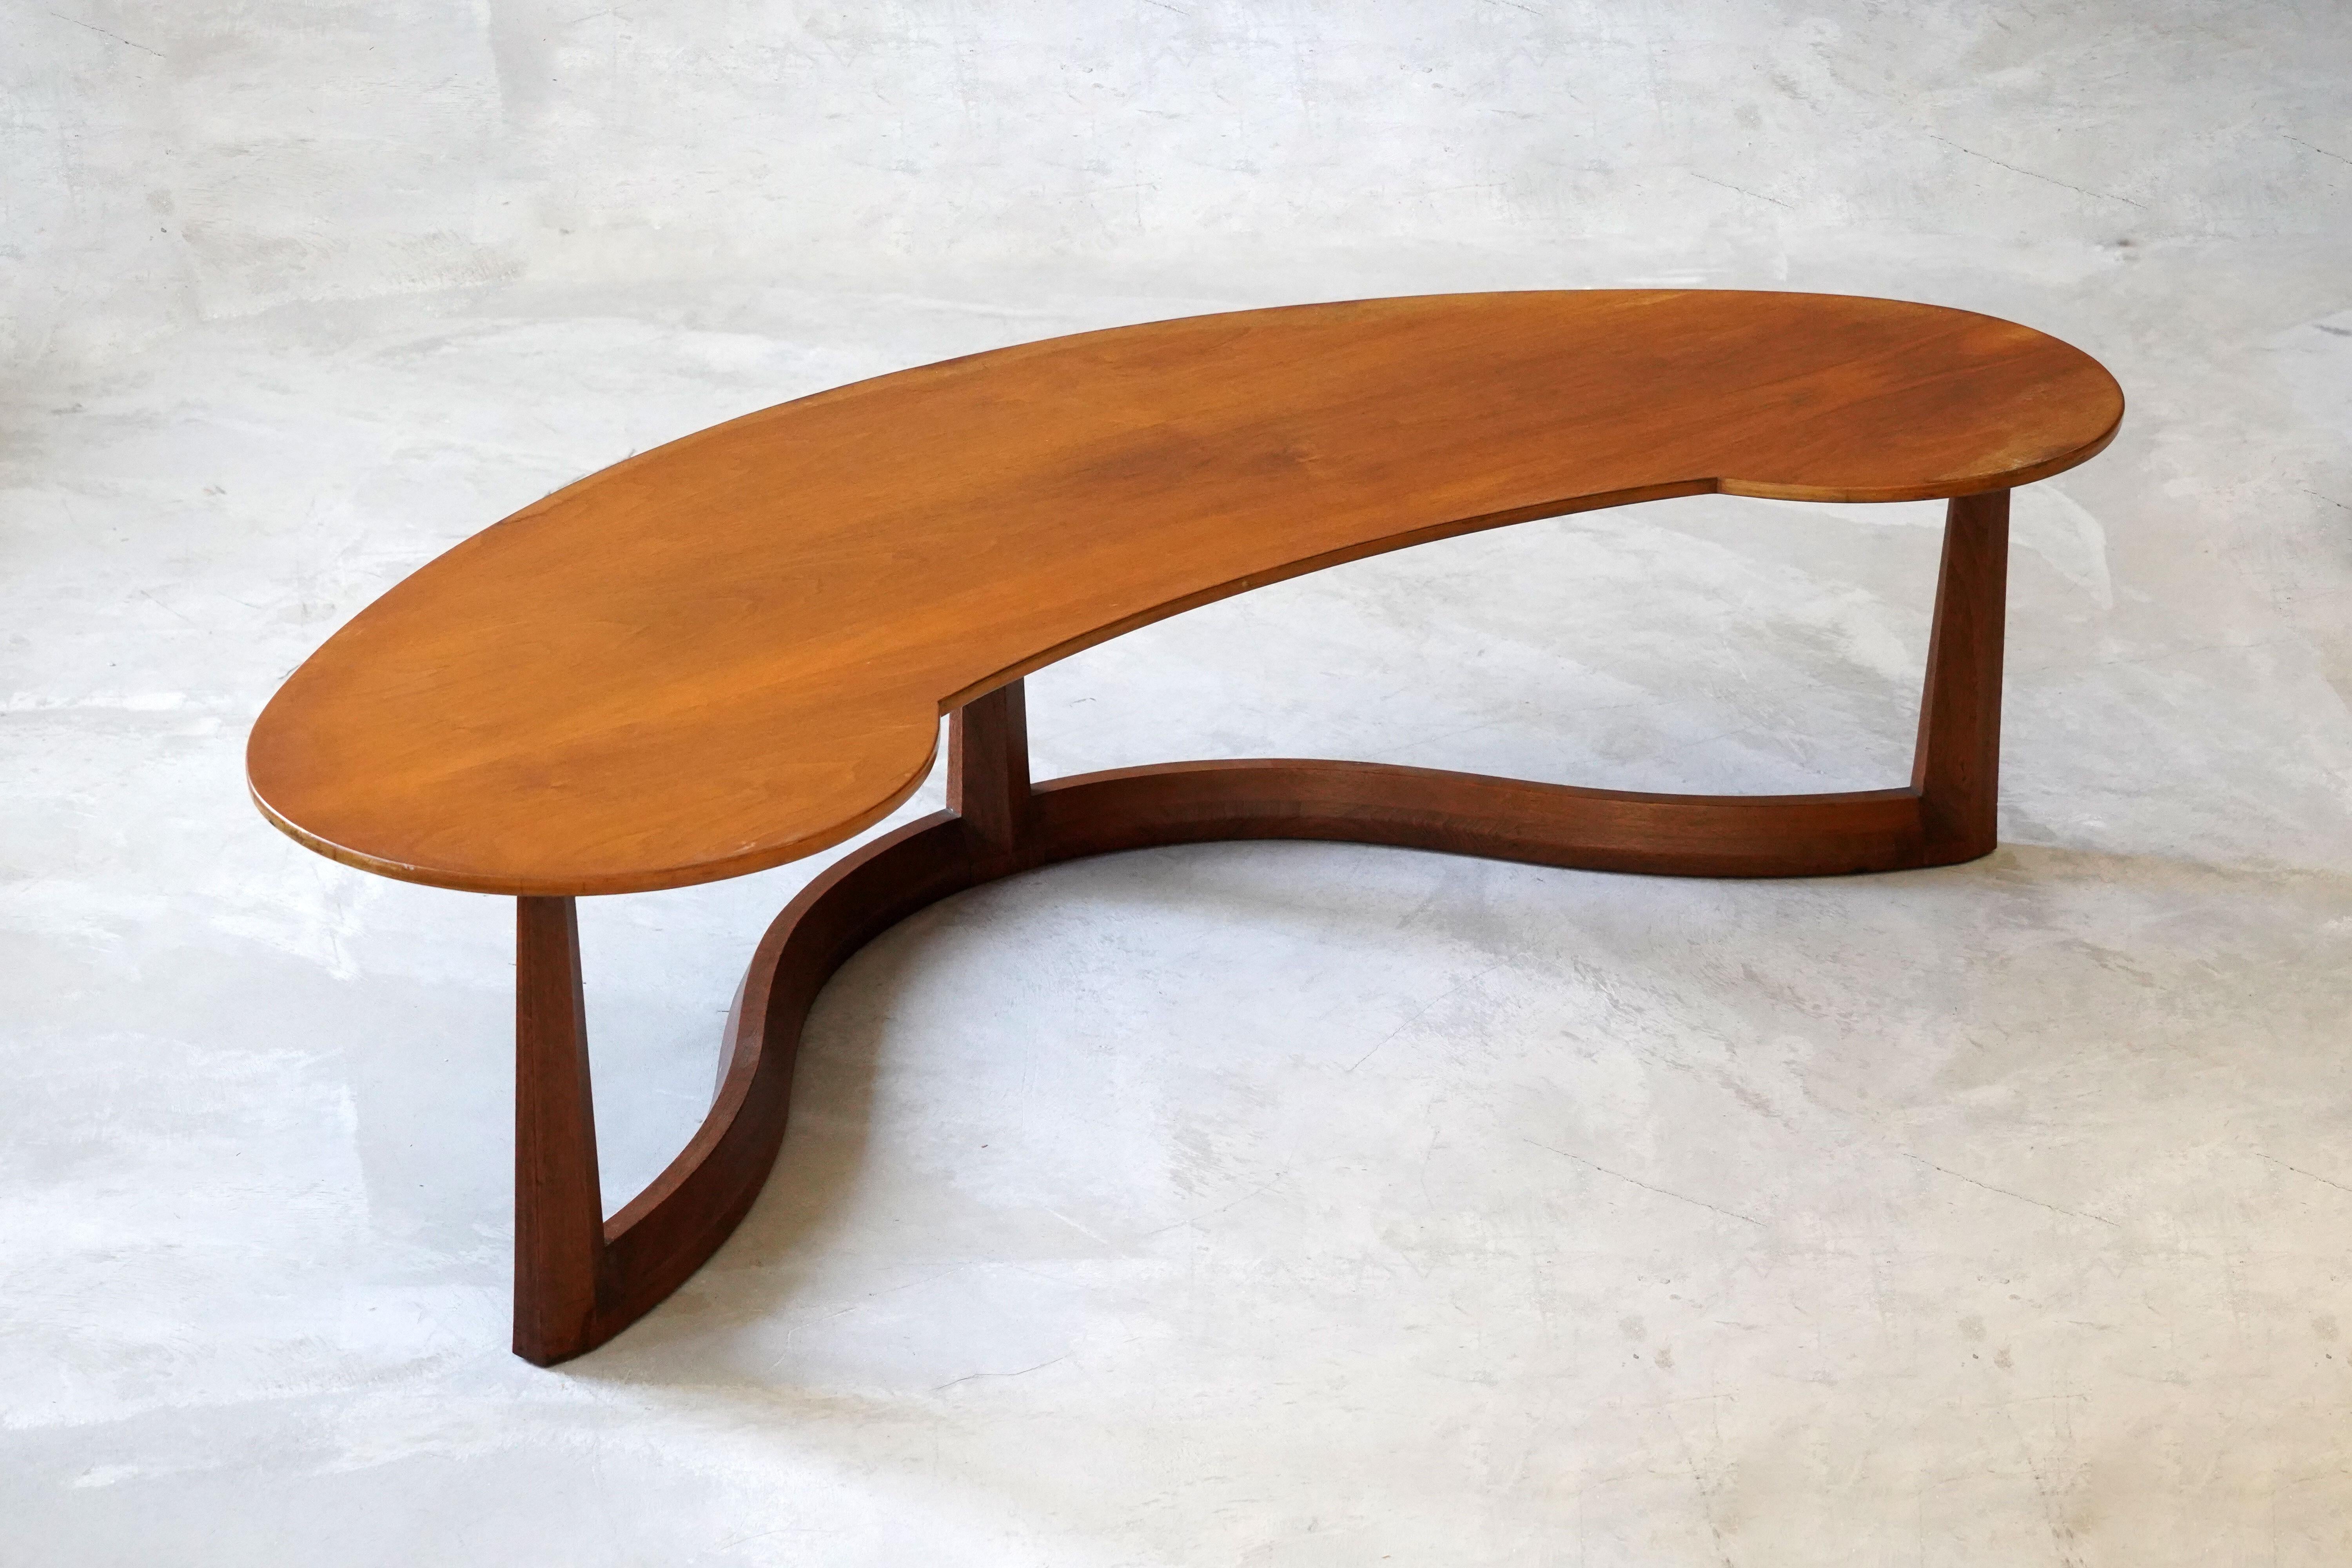 A rare sizable organic coffee or cocktail table. Designed and produced by John Widdicomb, Grand Rapids, Michigan, America. Produced in the 1950s. With makers label.

Other designers of the period include T.H. Robsjohn Gibbings, Paul Frankl, Tommi